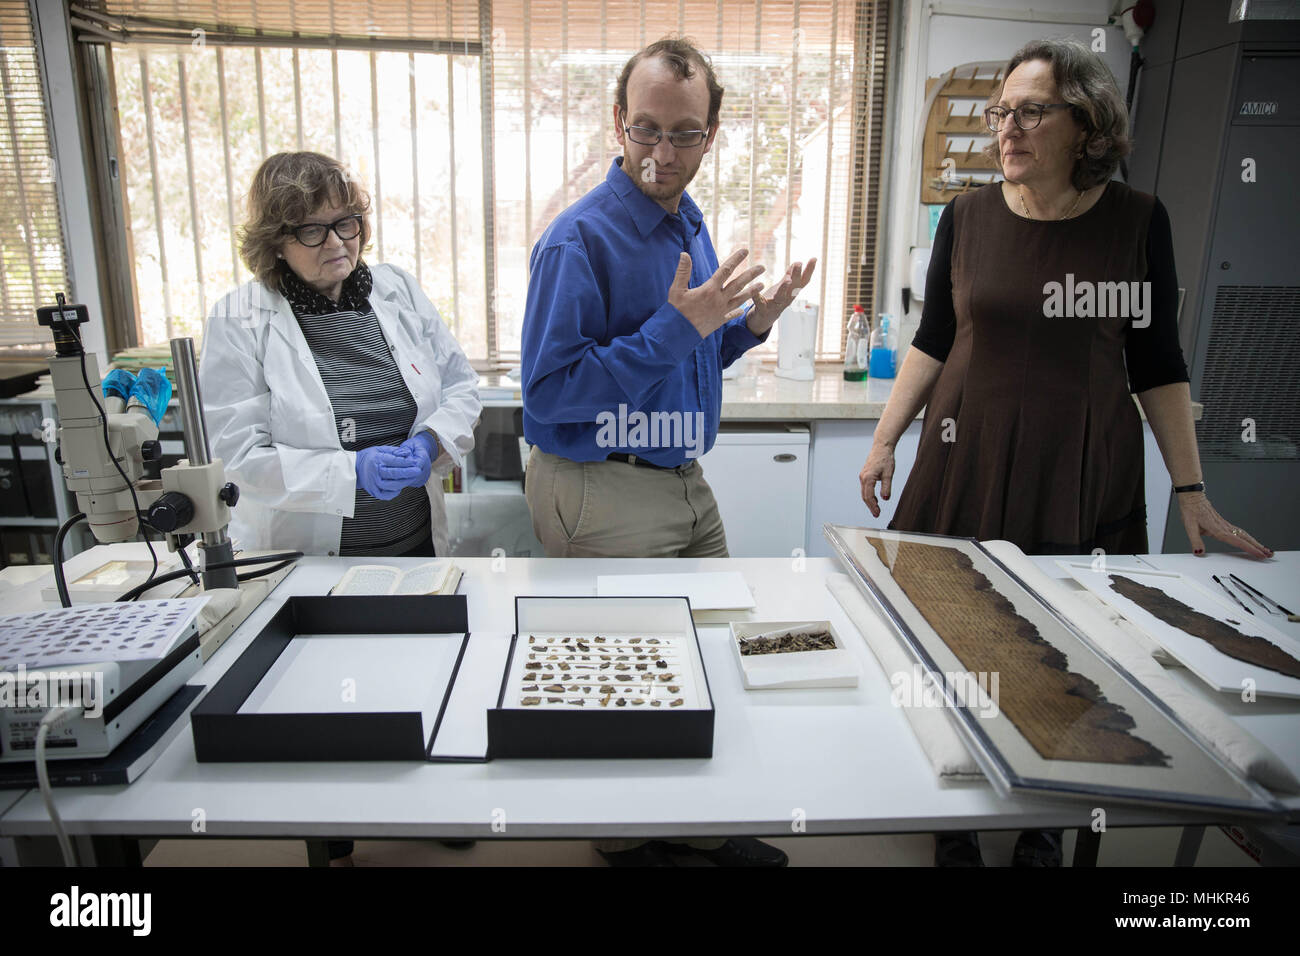 Jerusalem. 2nd May, 2018. Israel Antiquities Authority (IAA) staff members show fragments of a script at the IAA department in the Israel Museum in Jerusalem, on May 2, 2018. Advanced imaging technology originally developed for NASA has revealed previously unnoticed writing on fragments of the Dead Sea Scrolls, the IAA revealed on Tuesday. Moreover, one of the newly discerned and deciphered passages, written in early Hebrew, hints at the existence of a scroll never found and still unknown to researchers. Credit: JINI/Xinhua/Alamy Live News Stock Photo